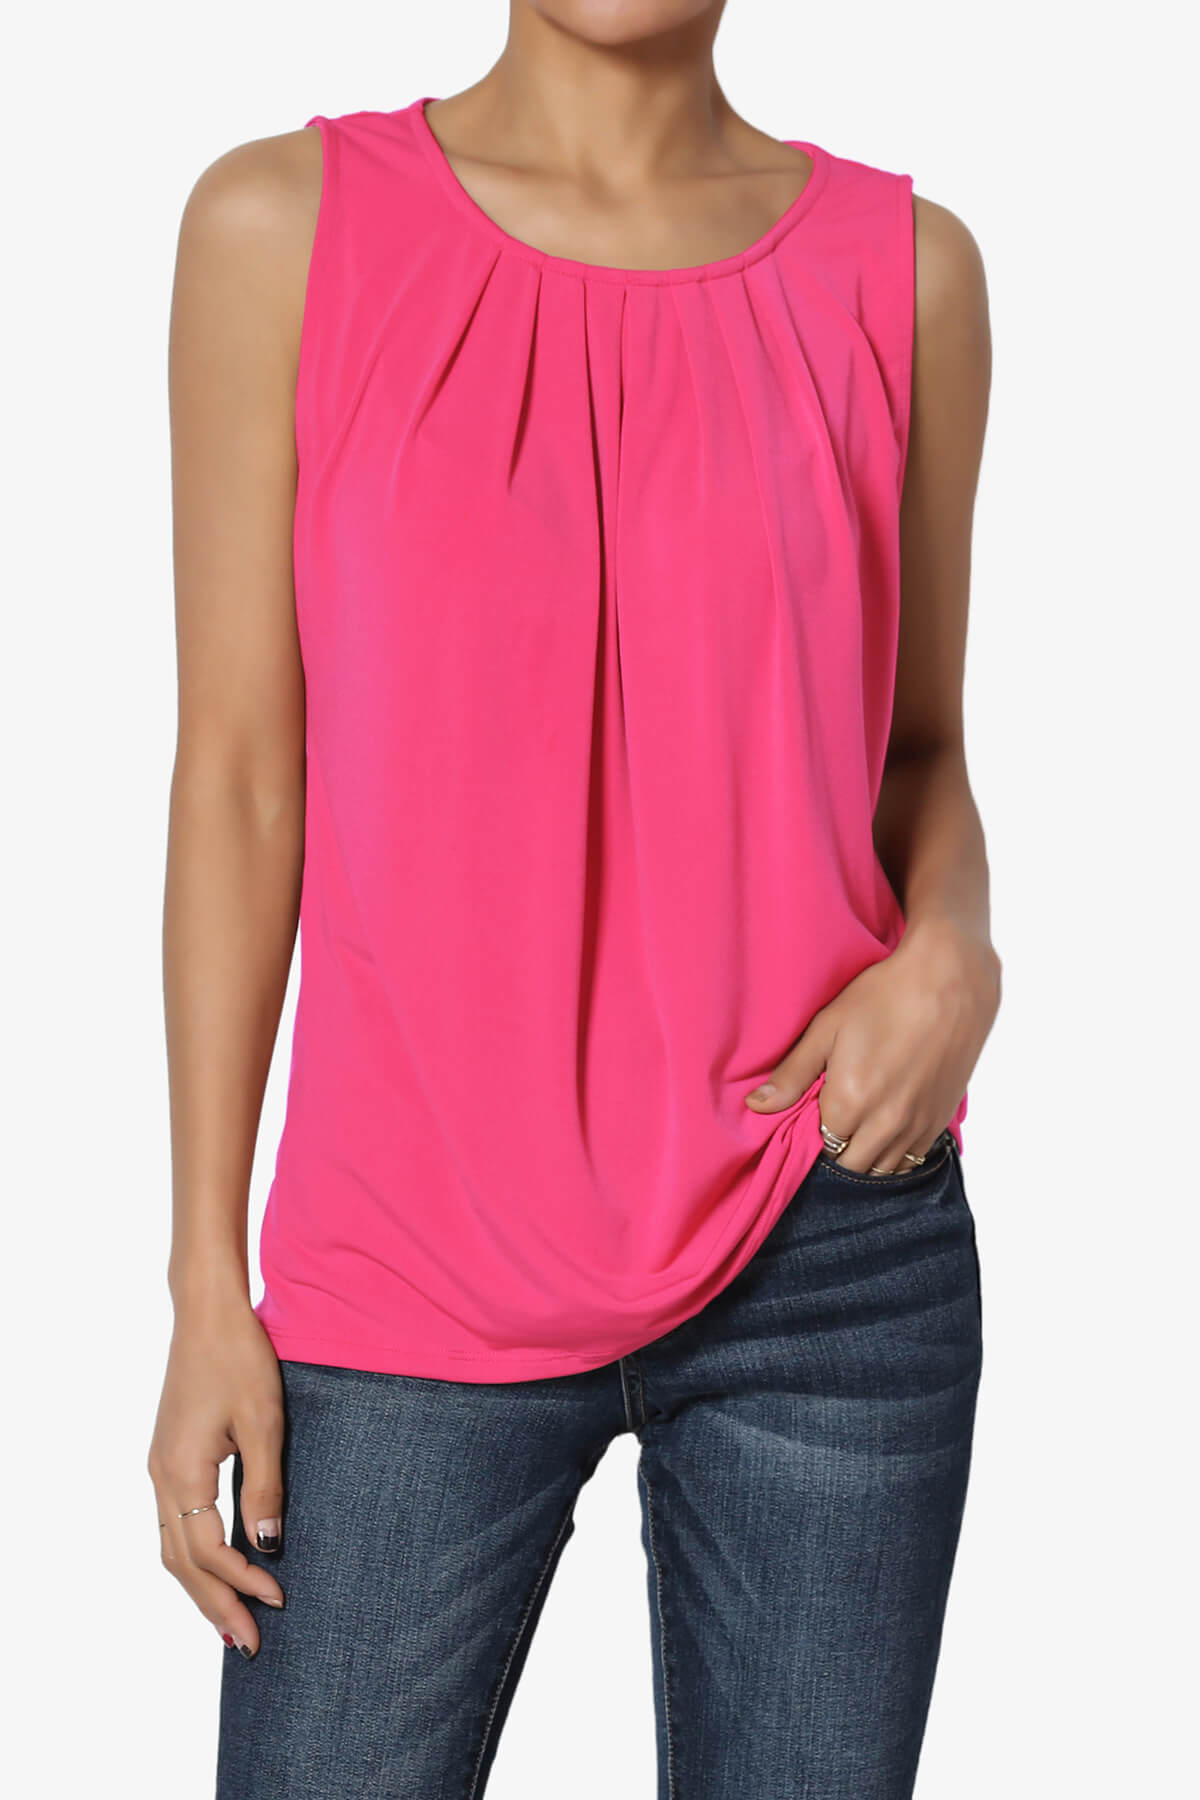 Chaffee Pleat Neck Tank Top HOT PINK_1